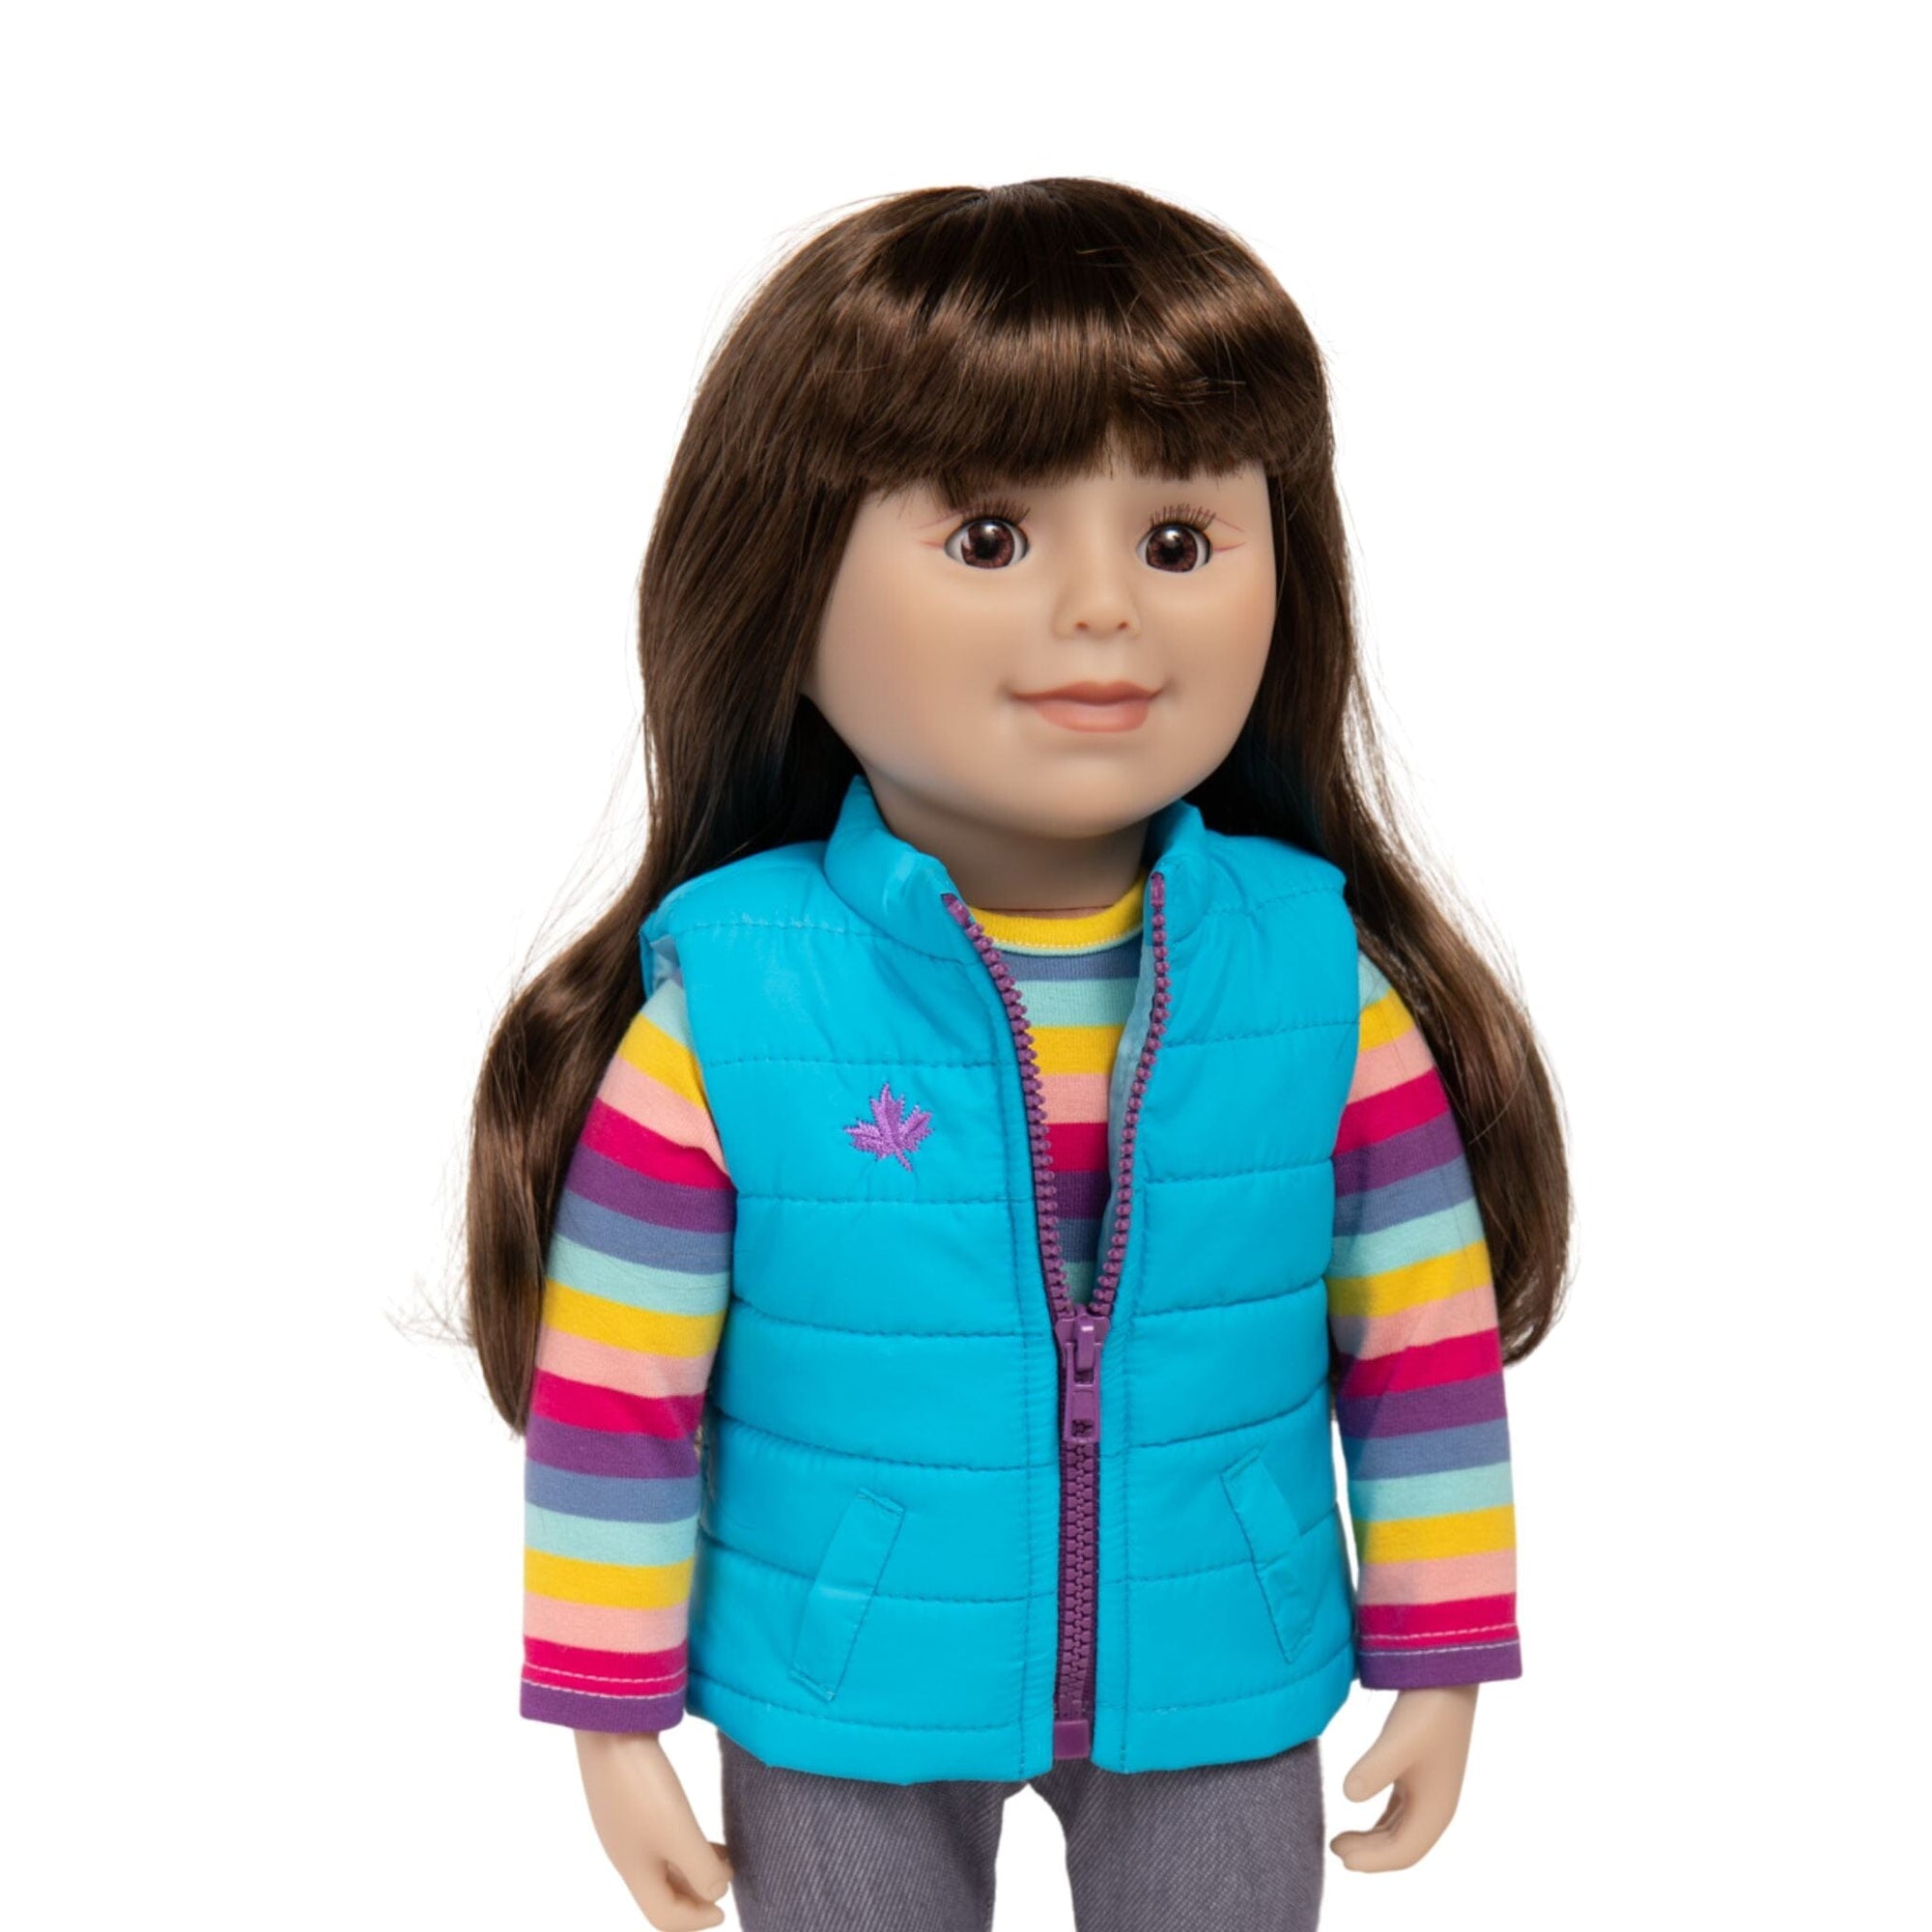 Canadian girl doll with brown eyes and brown hair with bangs